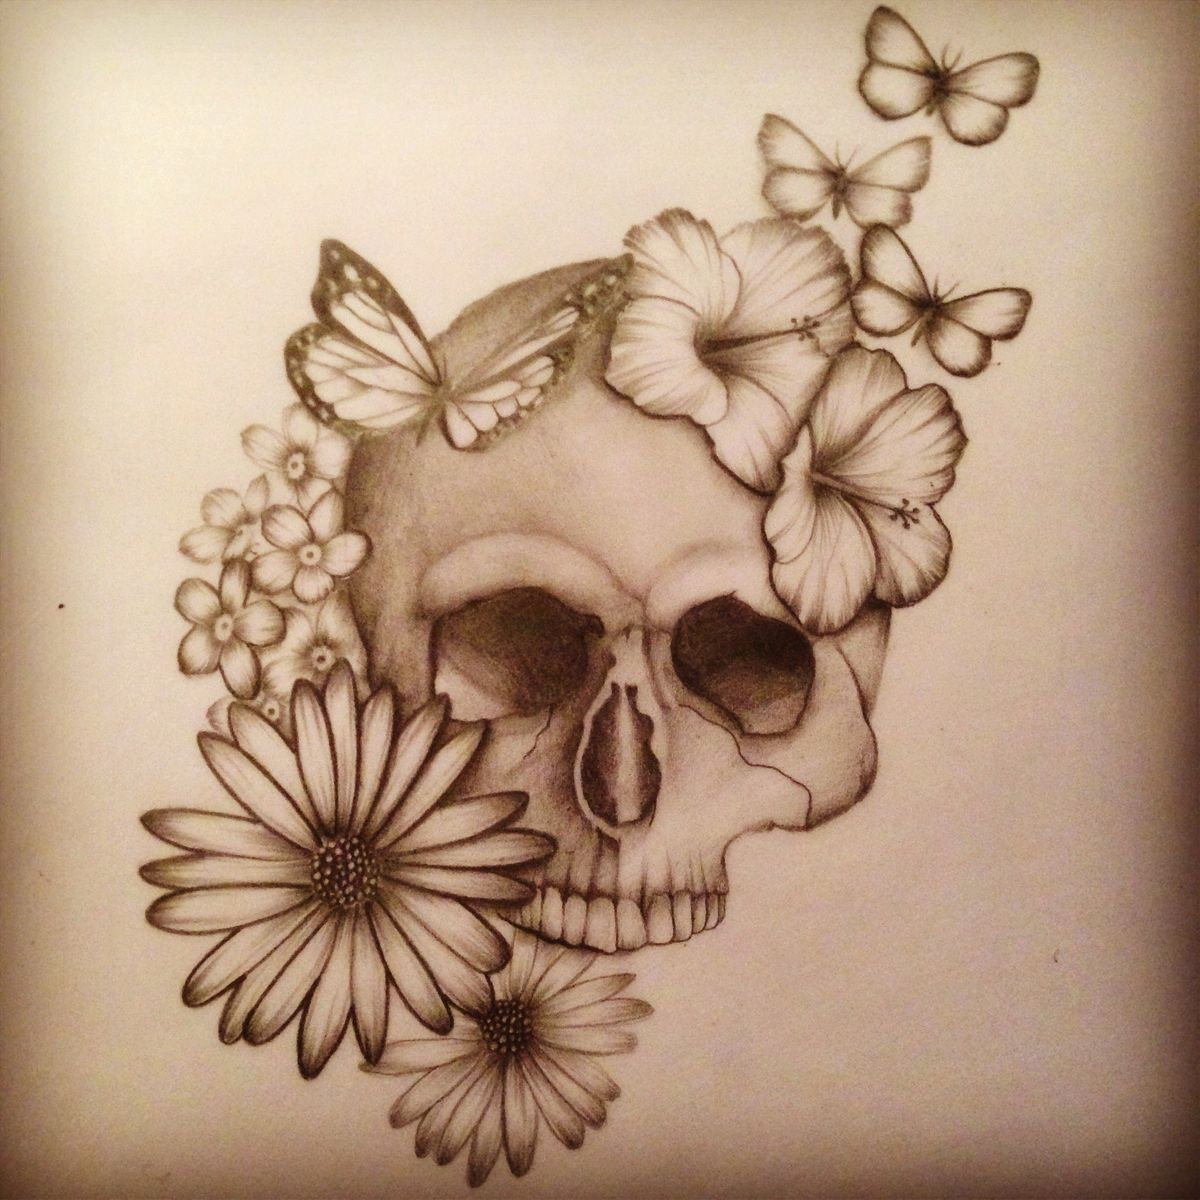 Flowers And Butterflies With Skull Tattoo Design within dimensions 1200 X 1200